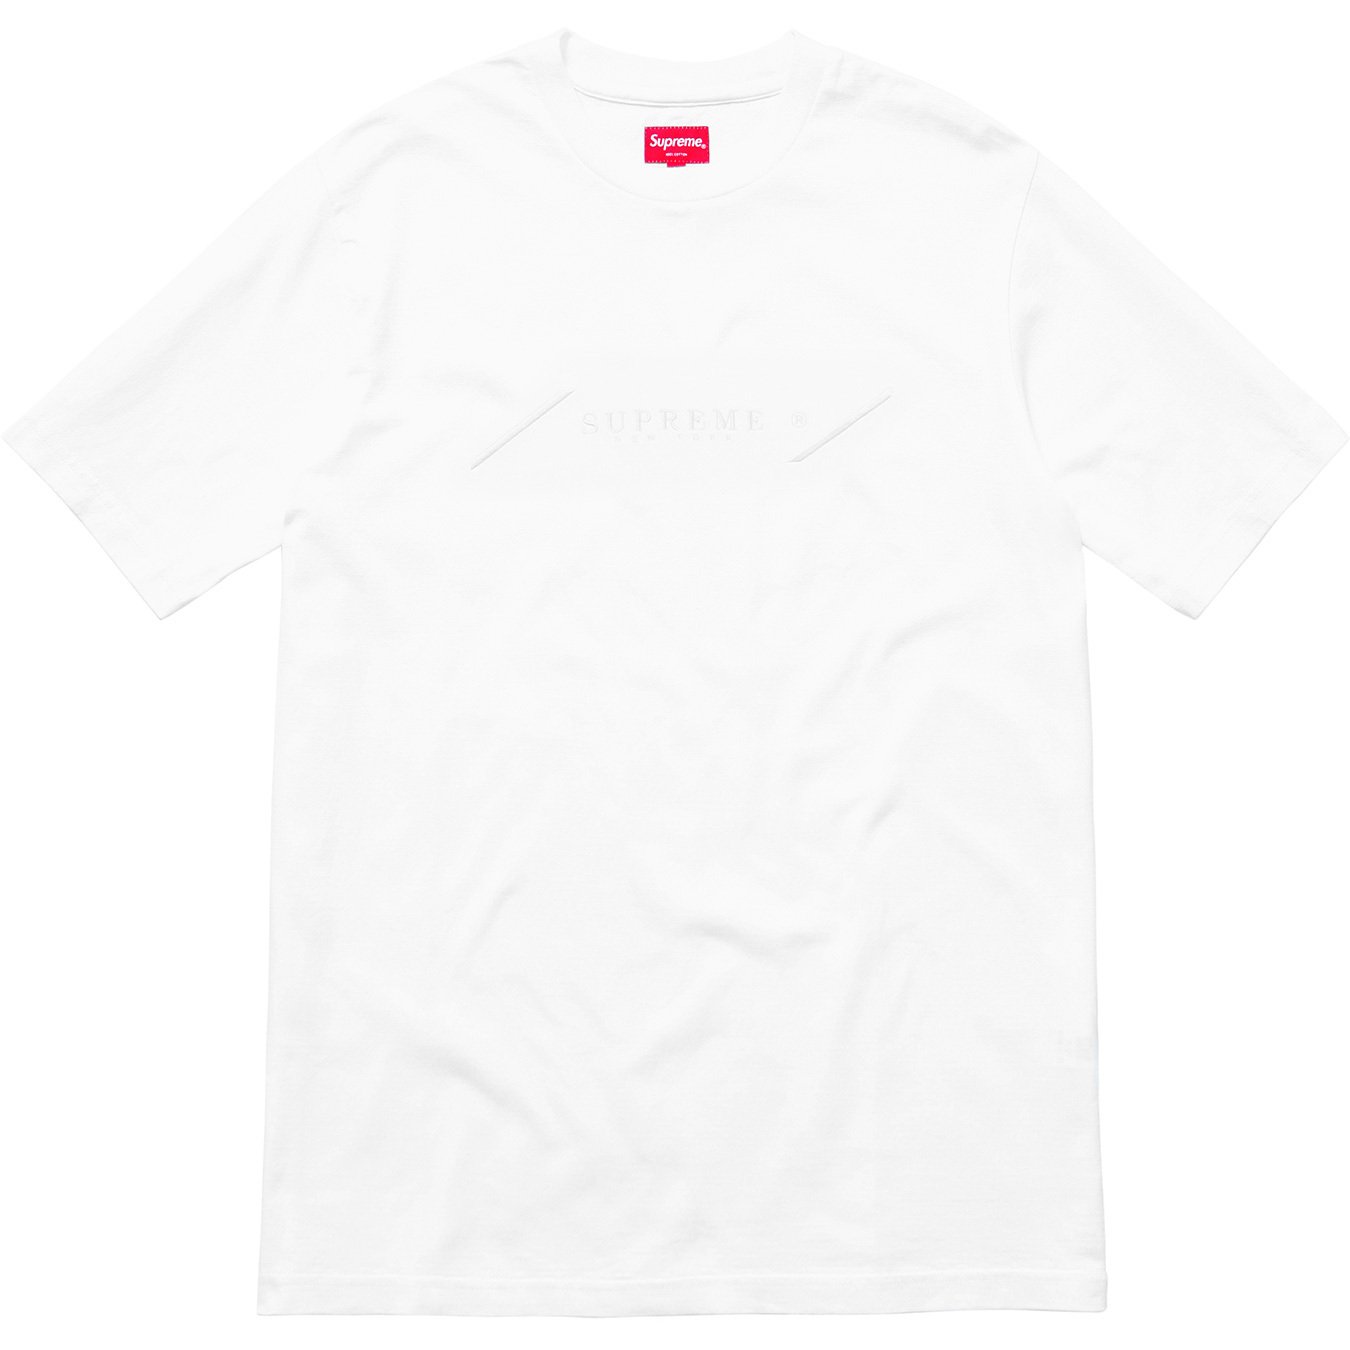 Tonal Embroidery Top - spring summer 2018 - Supreme